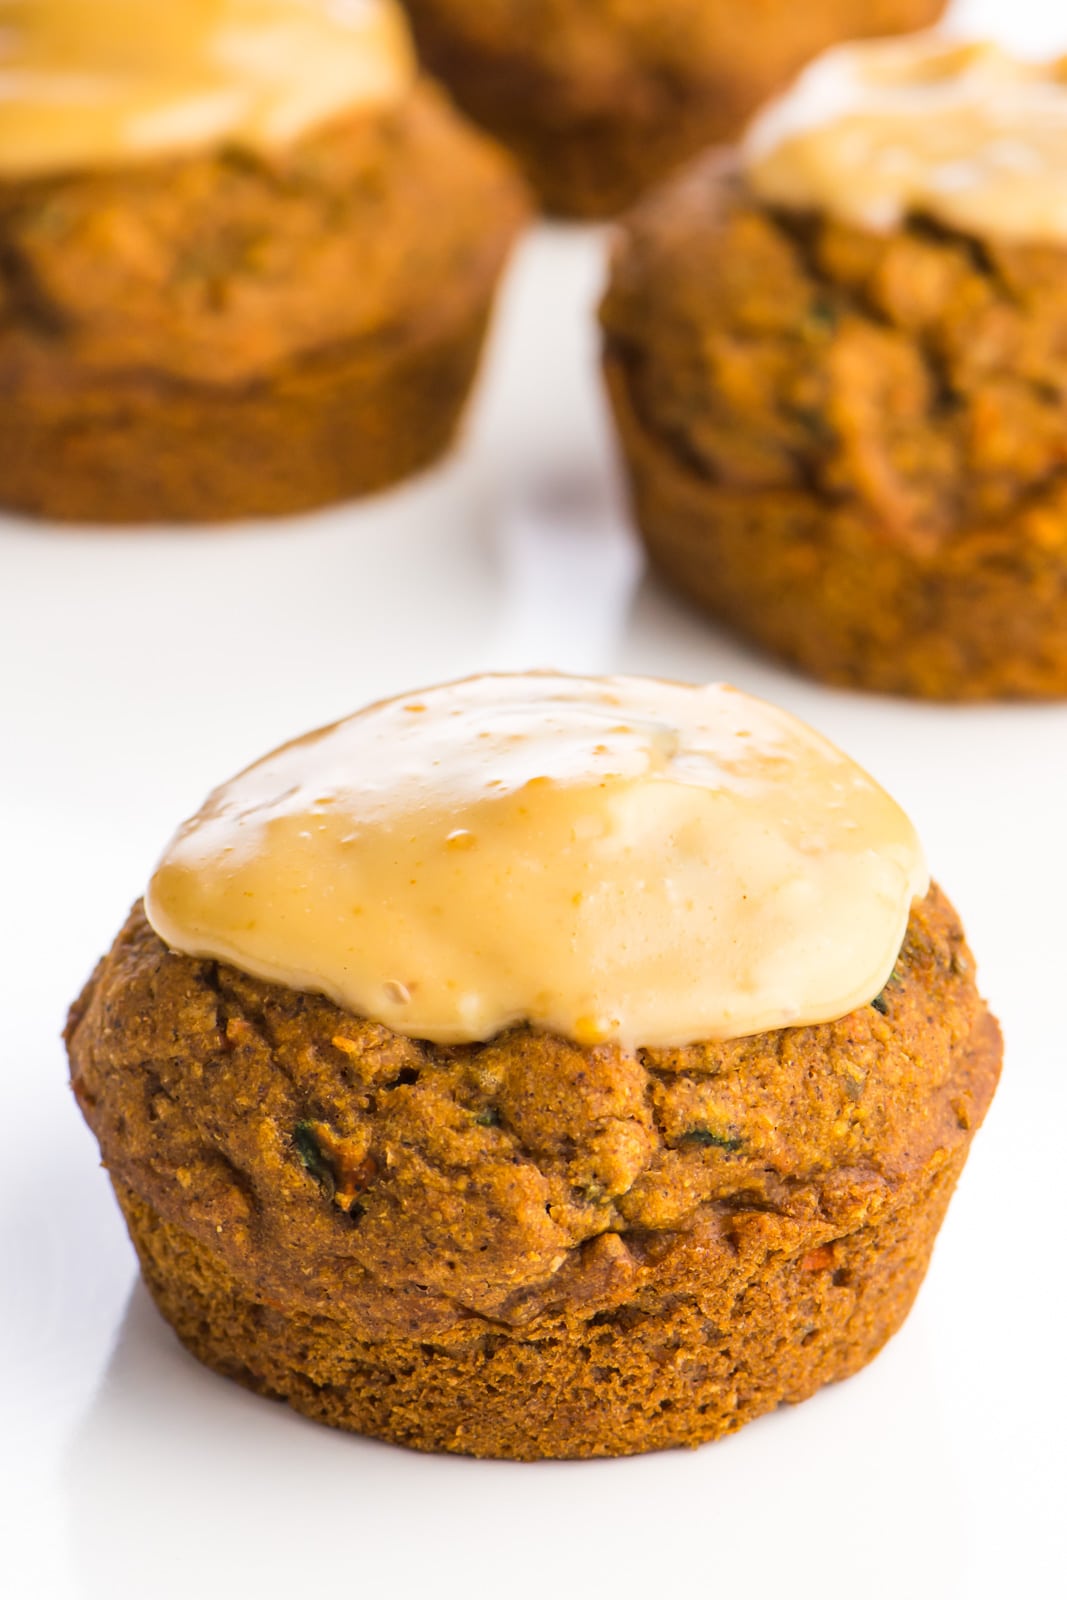 A vegan carrot cake muffin sits in the foreground with some maple drizzle on the top. There are more muffins int he background.